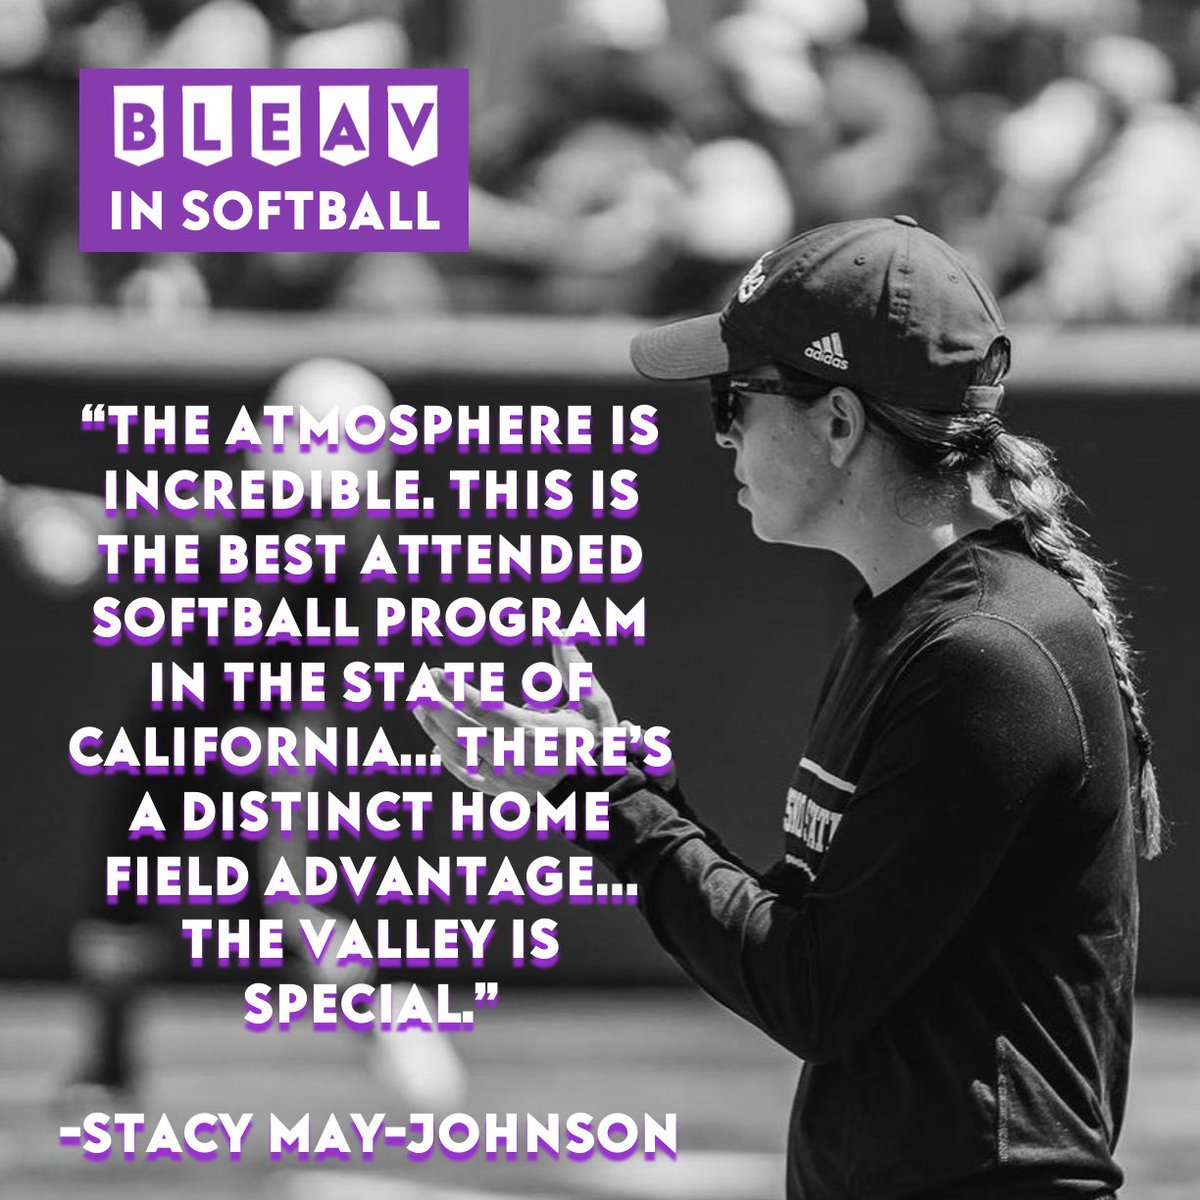 For The Valley 🙌

Hear @StacyMayJohnson talk about the rich history of @FresnoStateSB, the atmosphere at Margie Wright Diamond, the unique community in The Valley, and more. 

🎥🎙️ Tune in wherever you get your pods: linktr.ee/bleavinsoftball